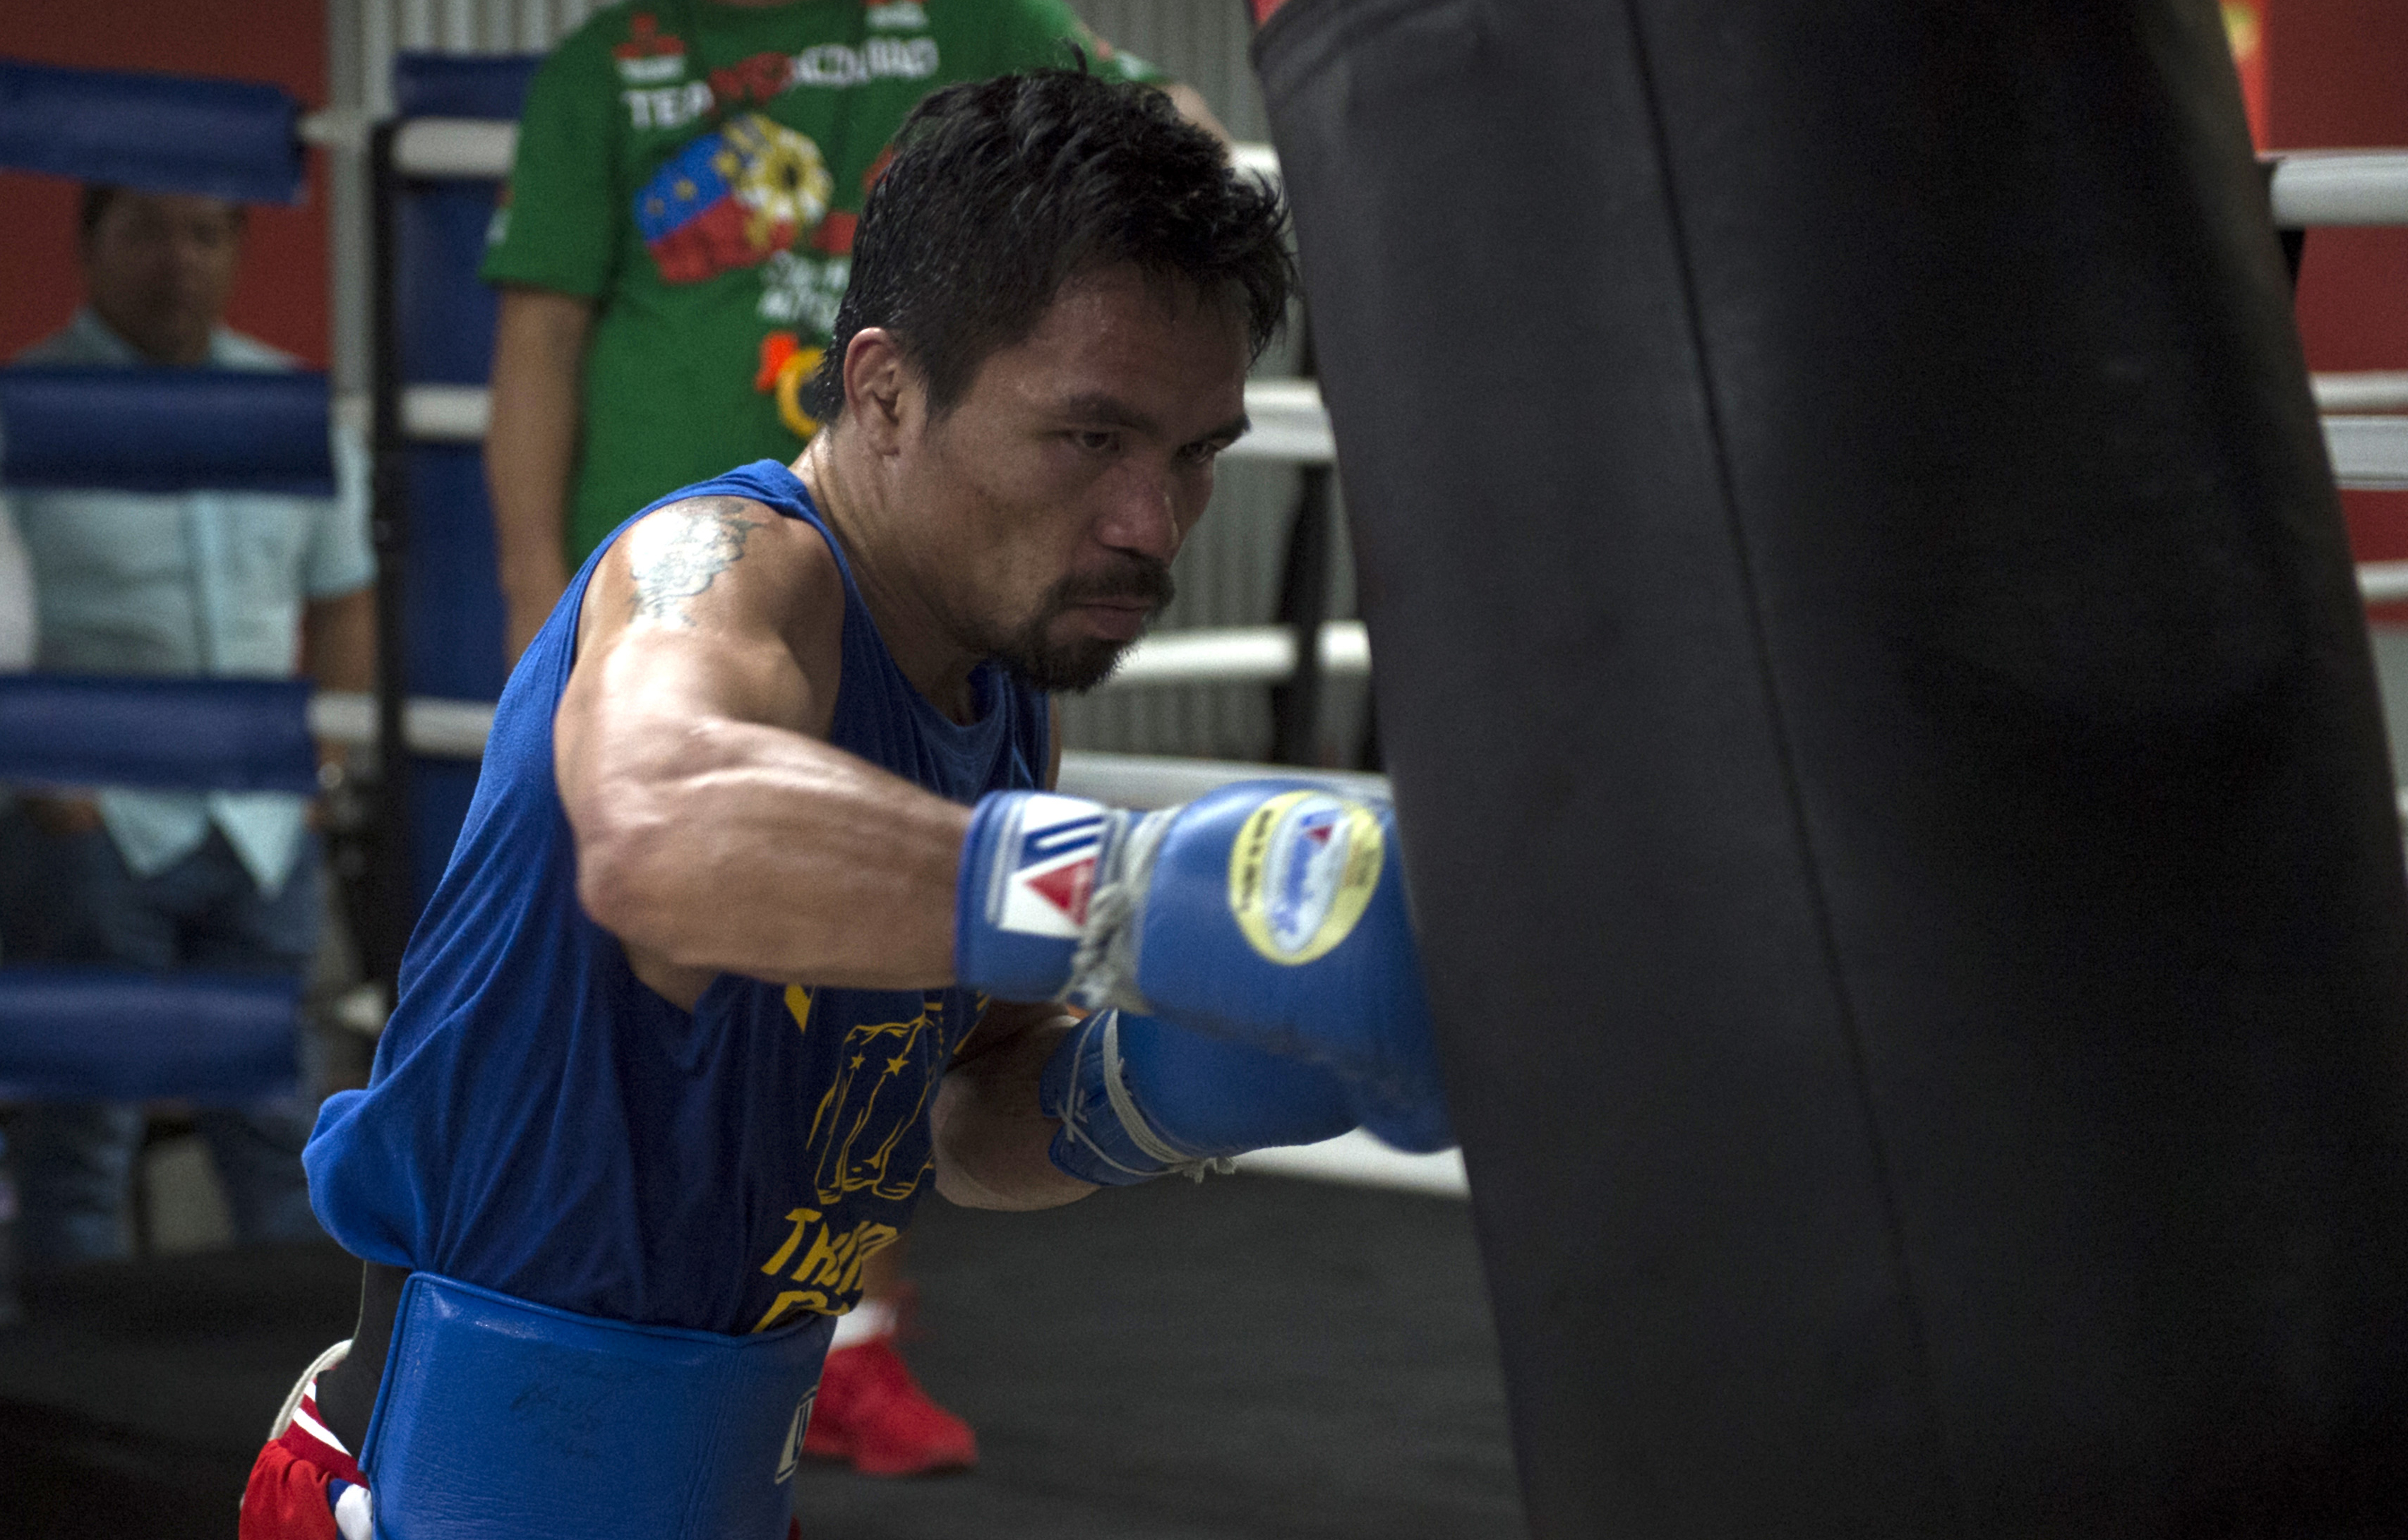 (FILES) This file photo taken on September 29, 2016 shows Philippine boxer Manny Pacquiao training at a gym in Manila. WBO welterweight world champion Manny Pacquiao is willing to square up with mixed martial arts star Conor McGregor if his potential superfight with Floyd Mayweather fails to materialise, a spokesman said on January 22, 2017.  / AFP PHOTO / TED ALJIBE